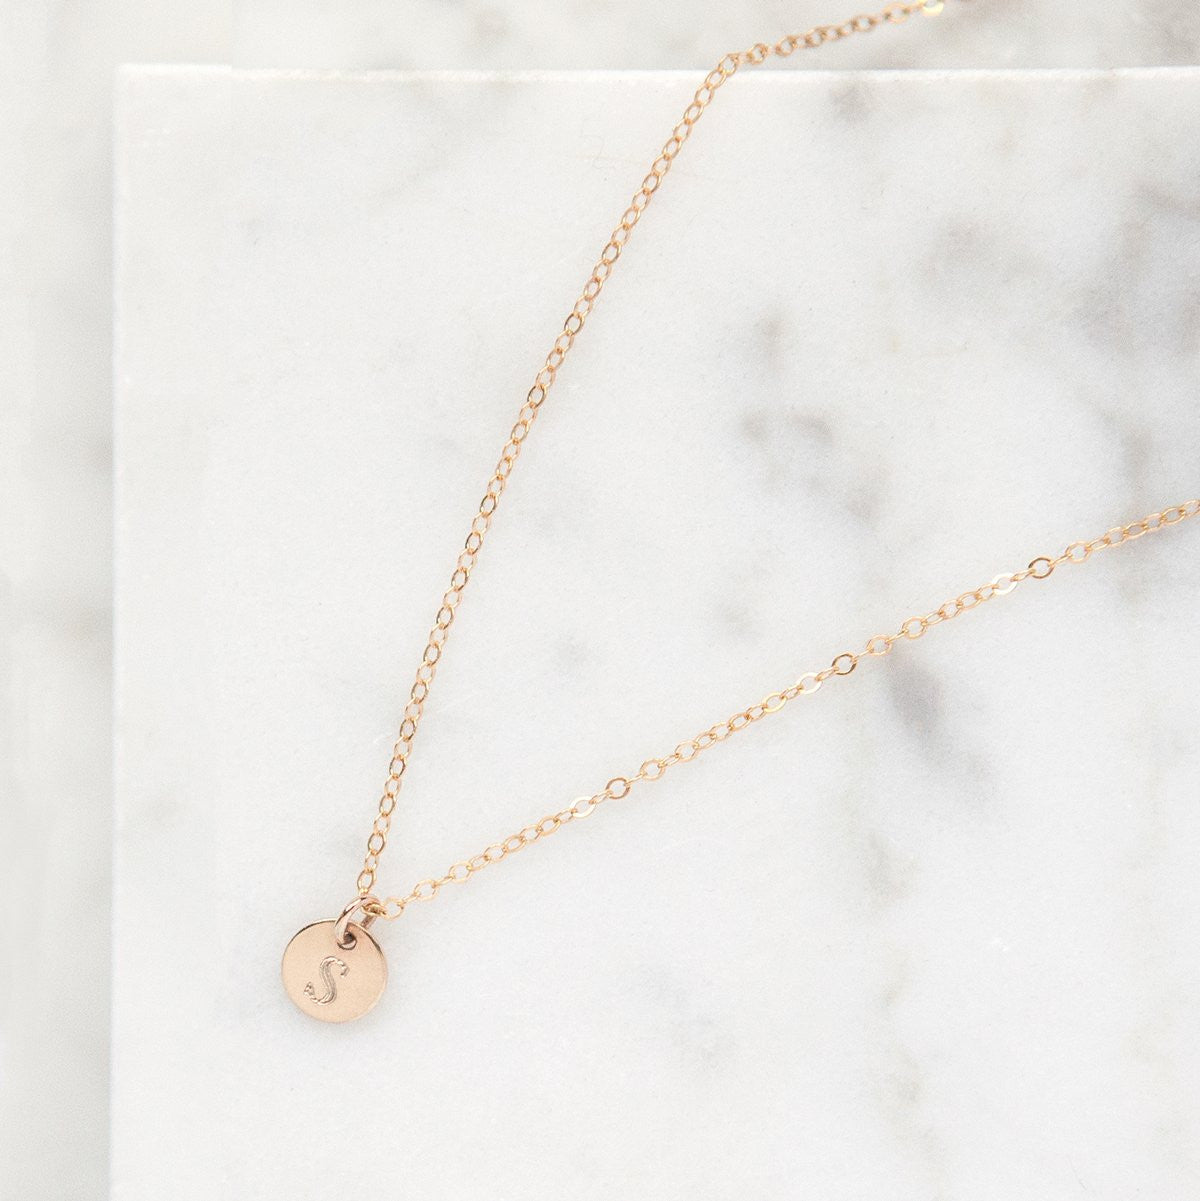 personalized initial disc necklace, minimal gold jewelry, bridesmaid gifts, gifts for her, gifts for wife, handmade, jewelry for mom, gifts for sister, gifts for aunt